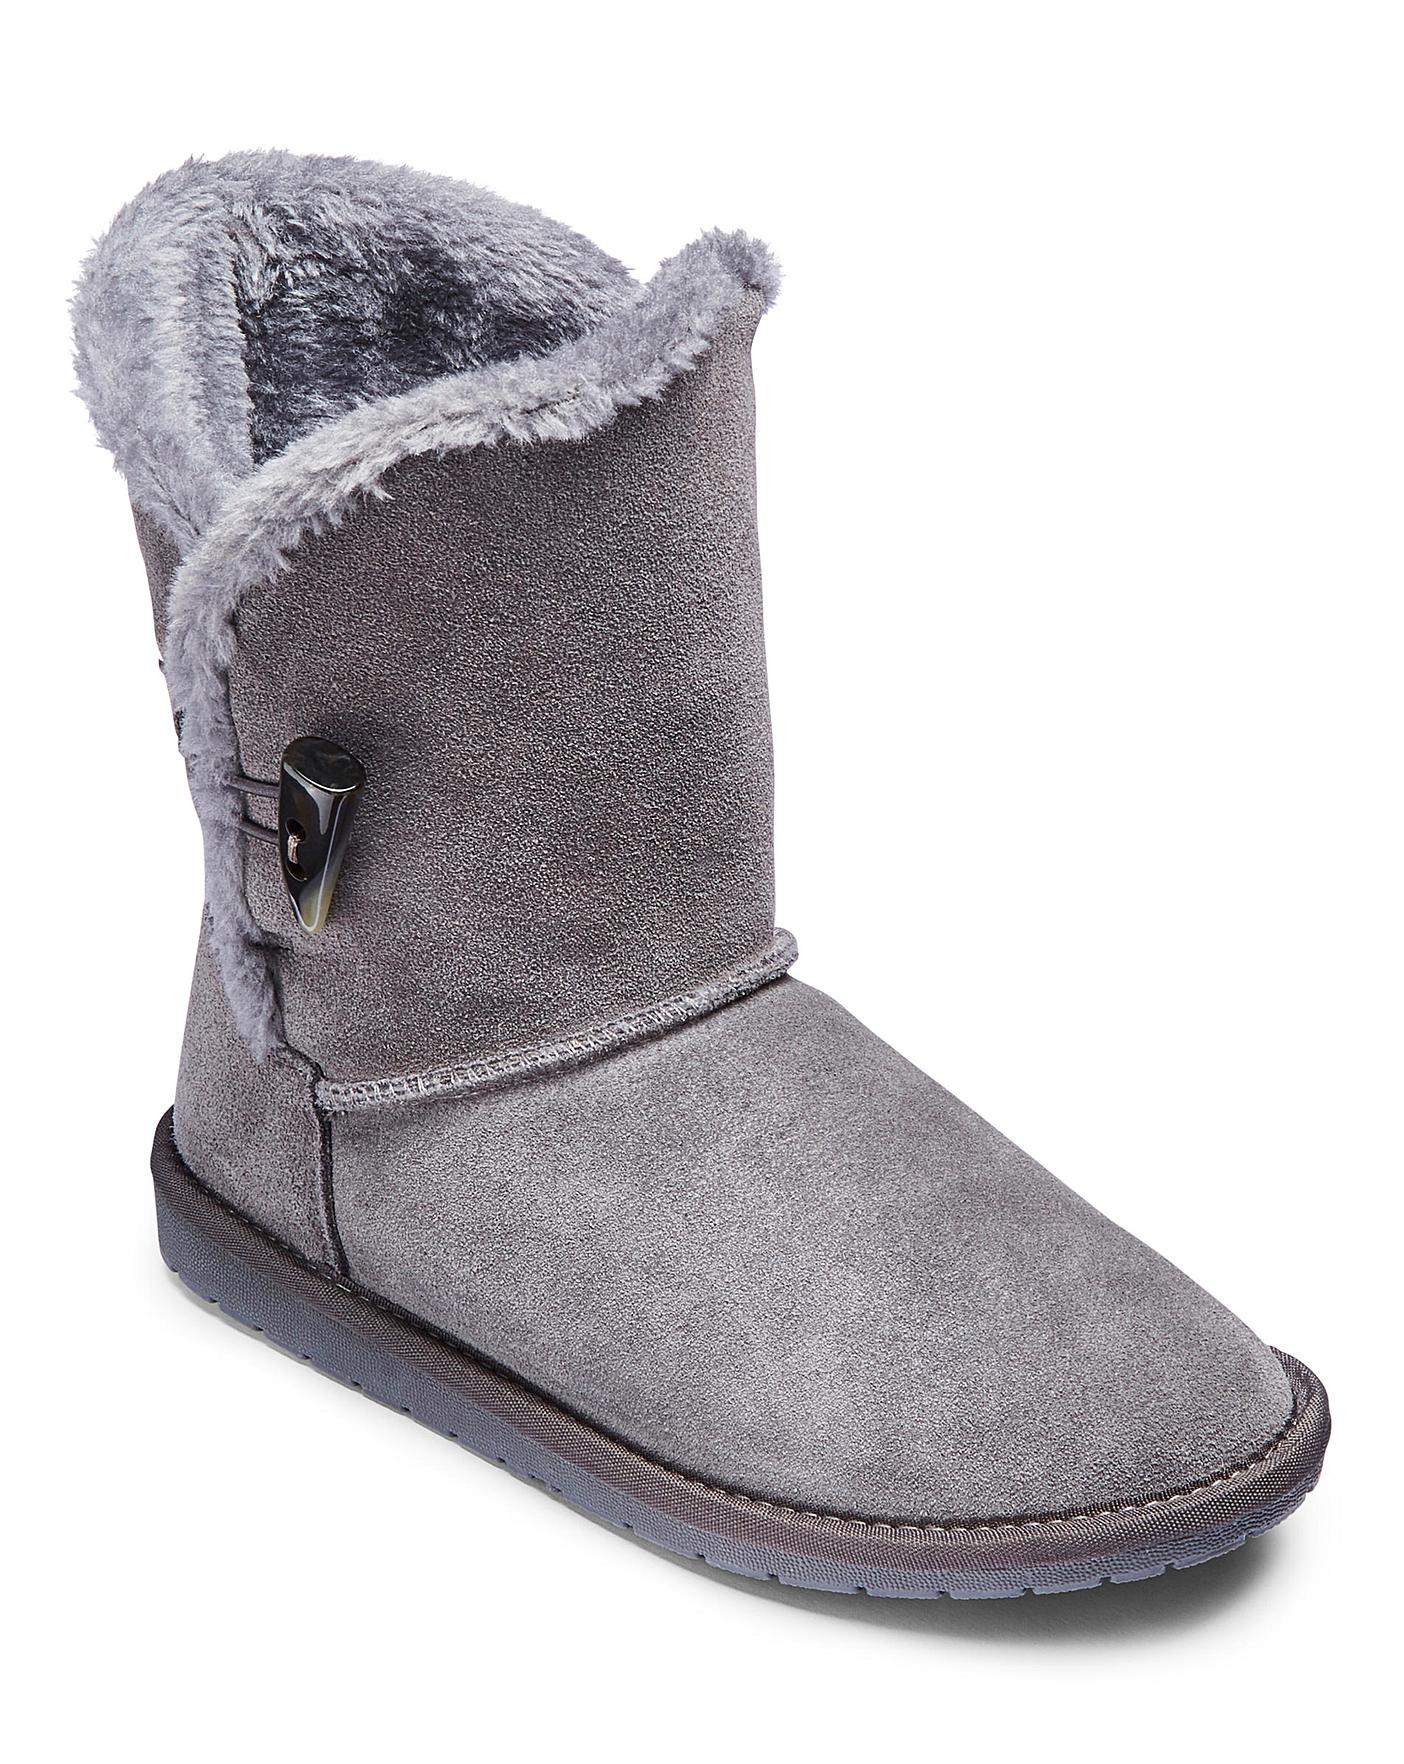 Suede Warm Lined Ankle Boots EEE Fit | Ambrose Wilson